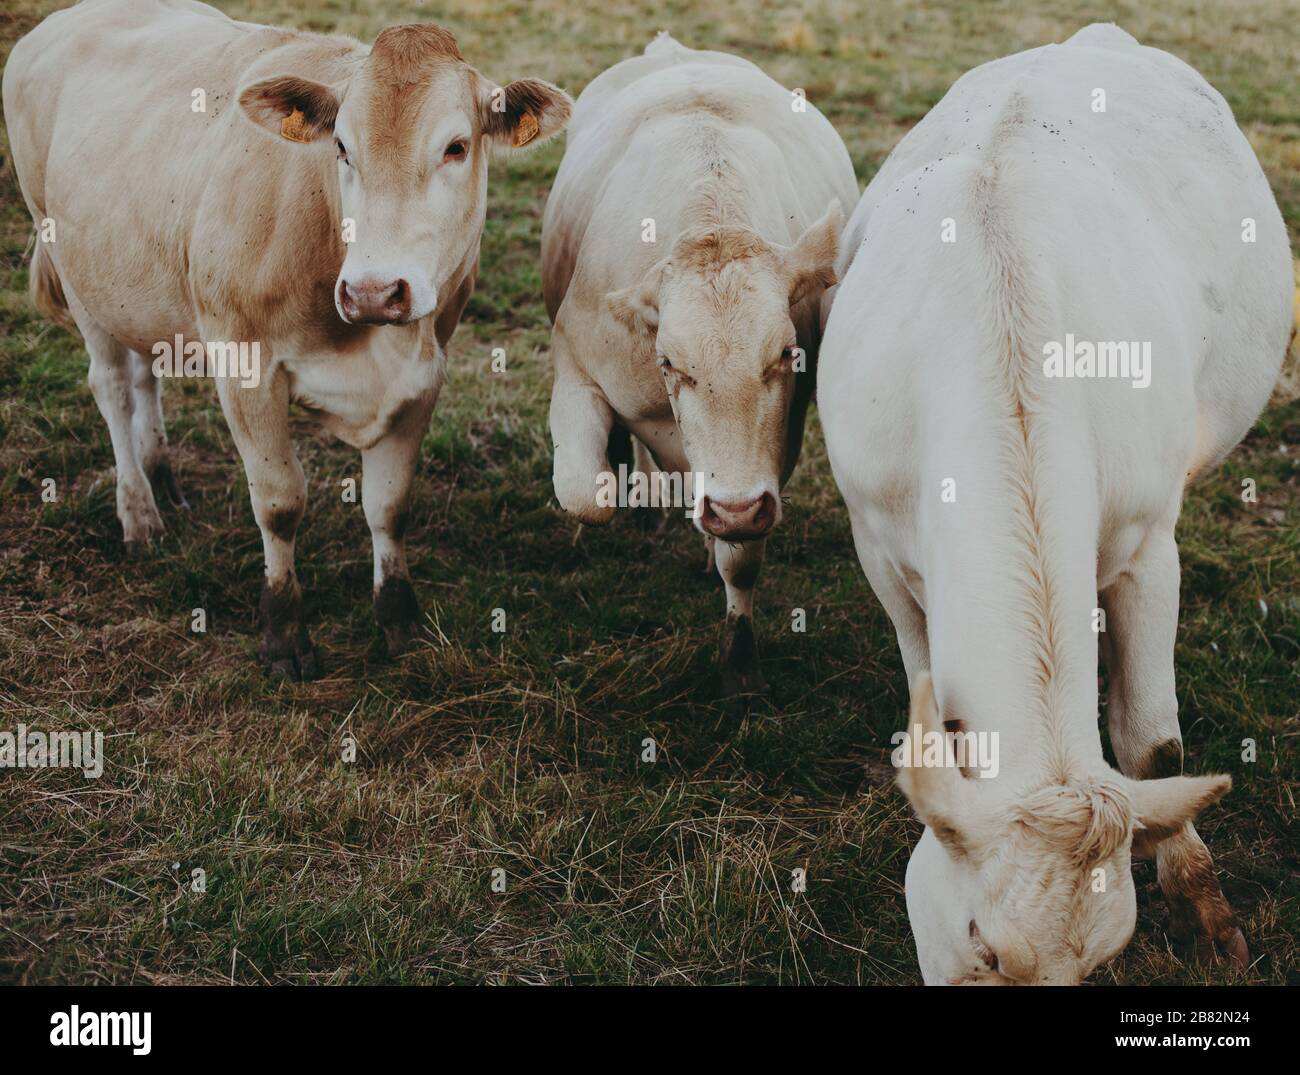 A local family farm raises cows for meat in the Champagne Region, France, Cows are grass-fed on surrounding pastures during warm months. Stock Photo